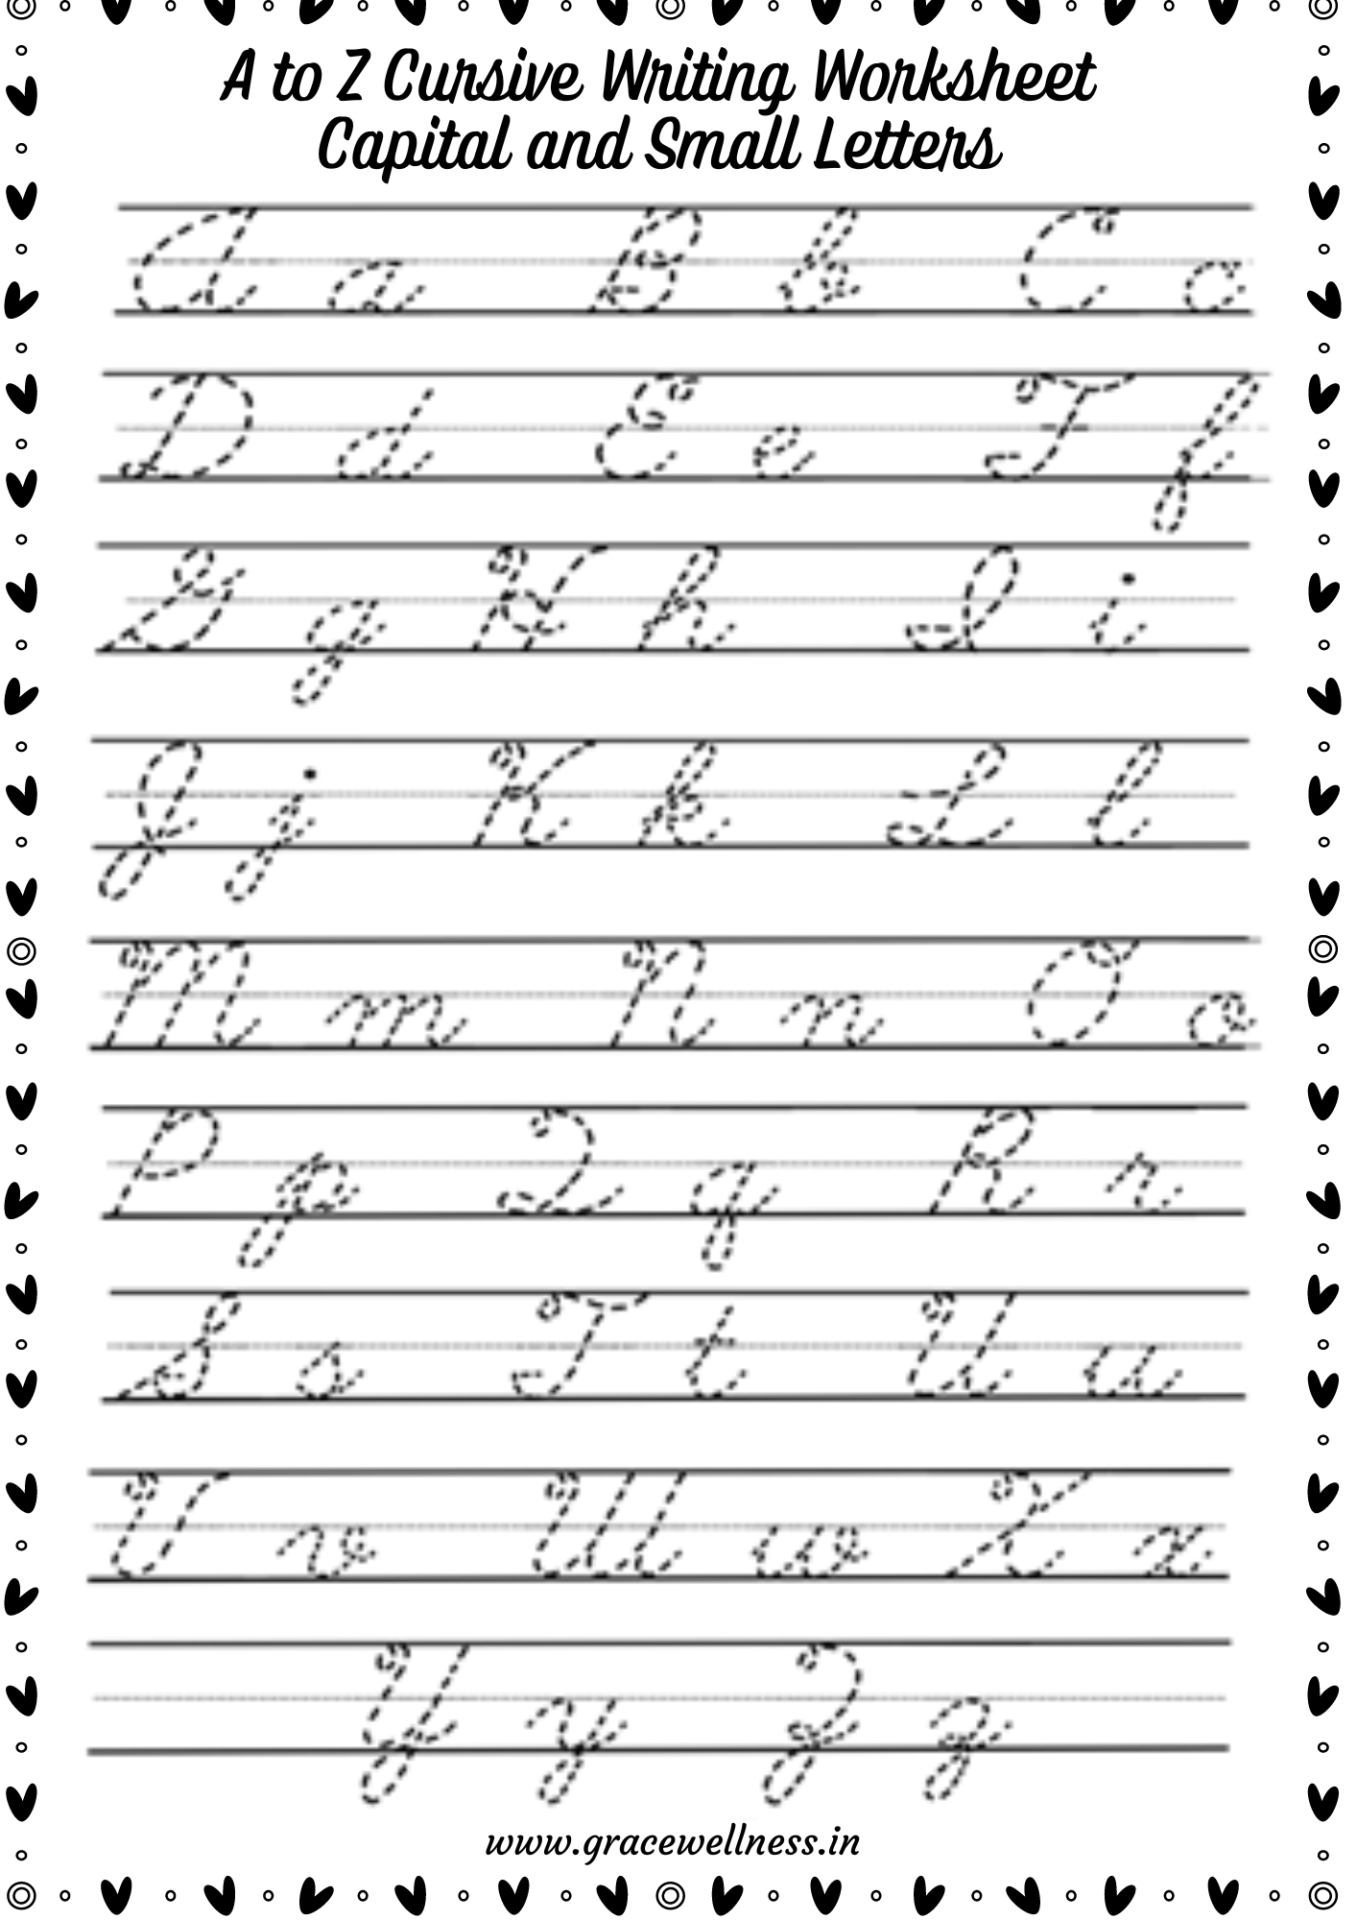 Cursive Writing letter A - Z Worksheet | Cursive Writing Capital and ...